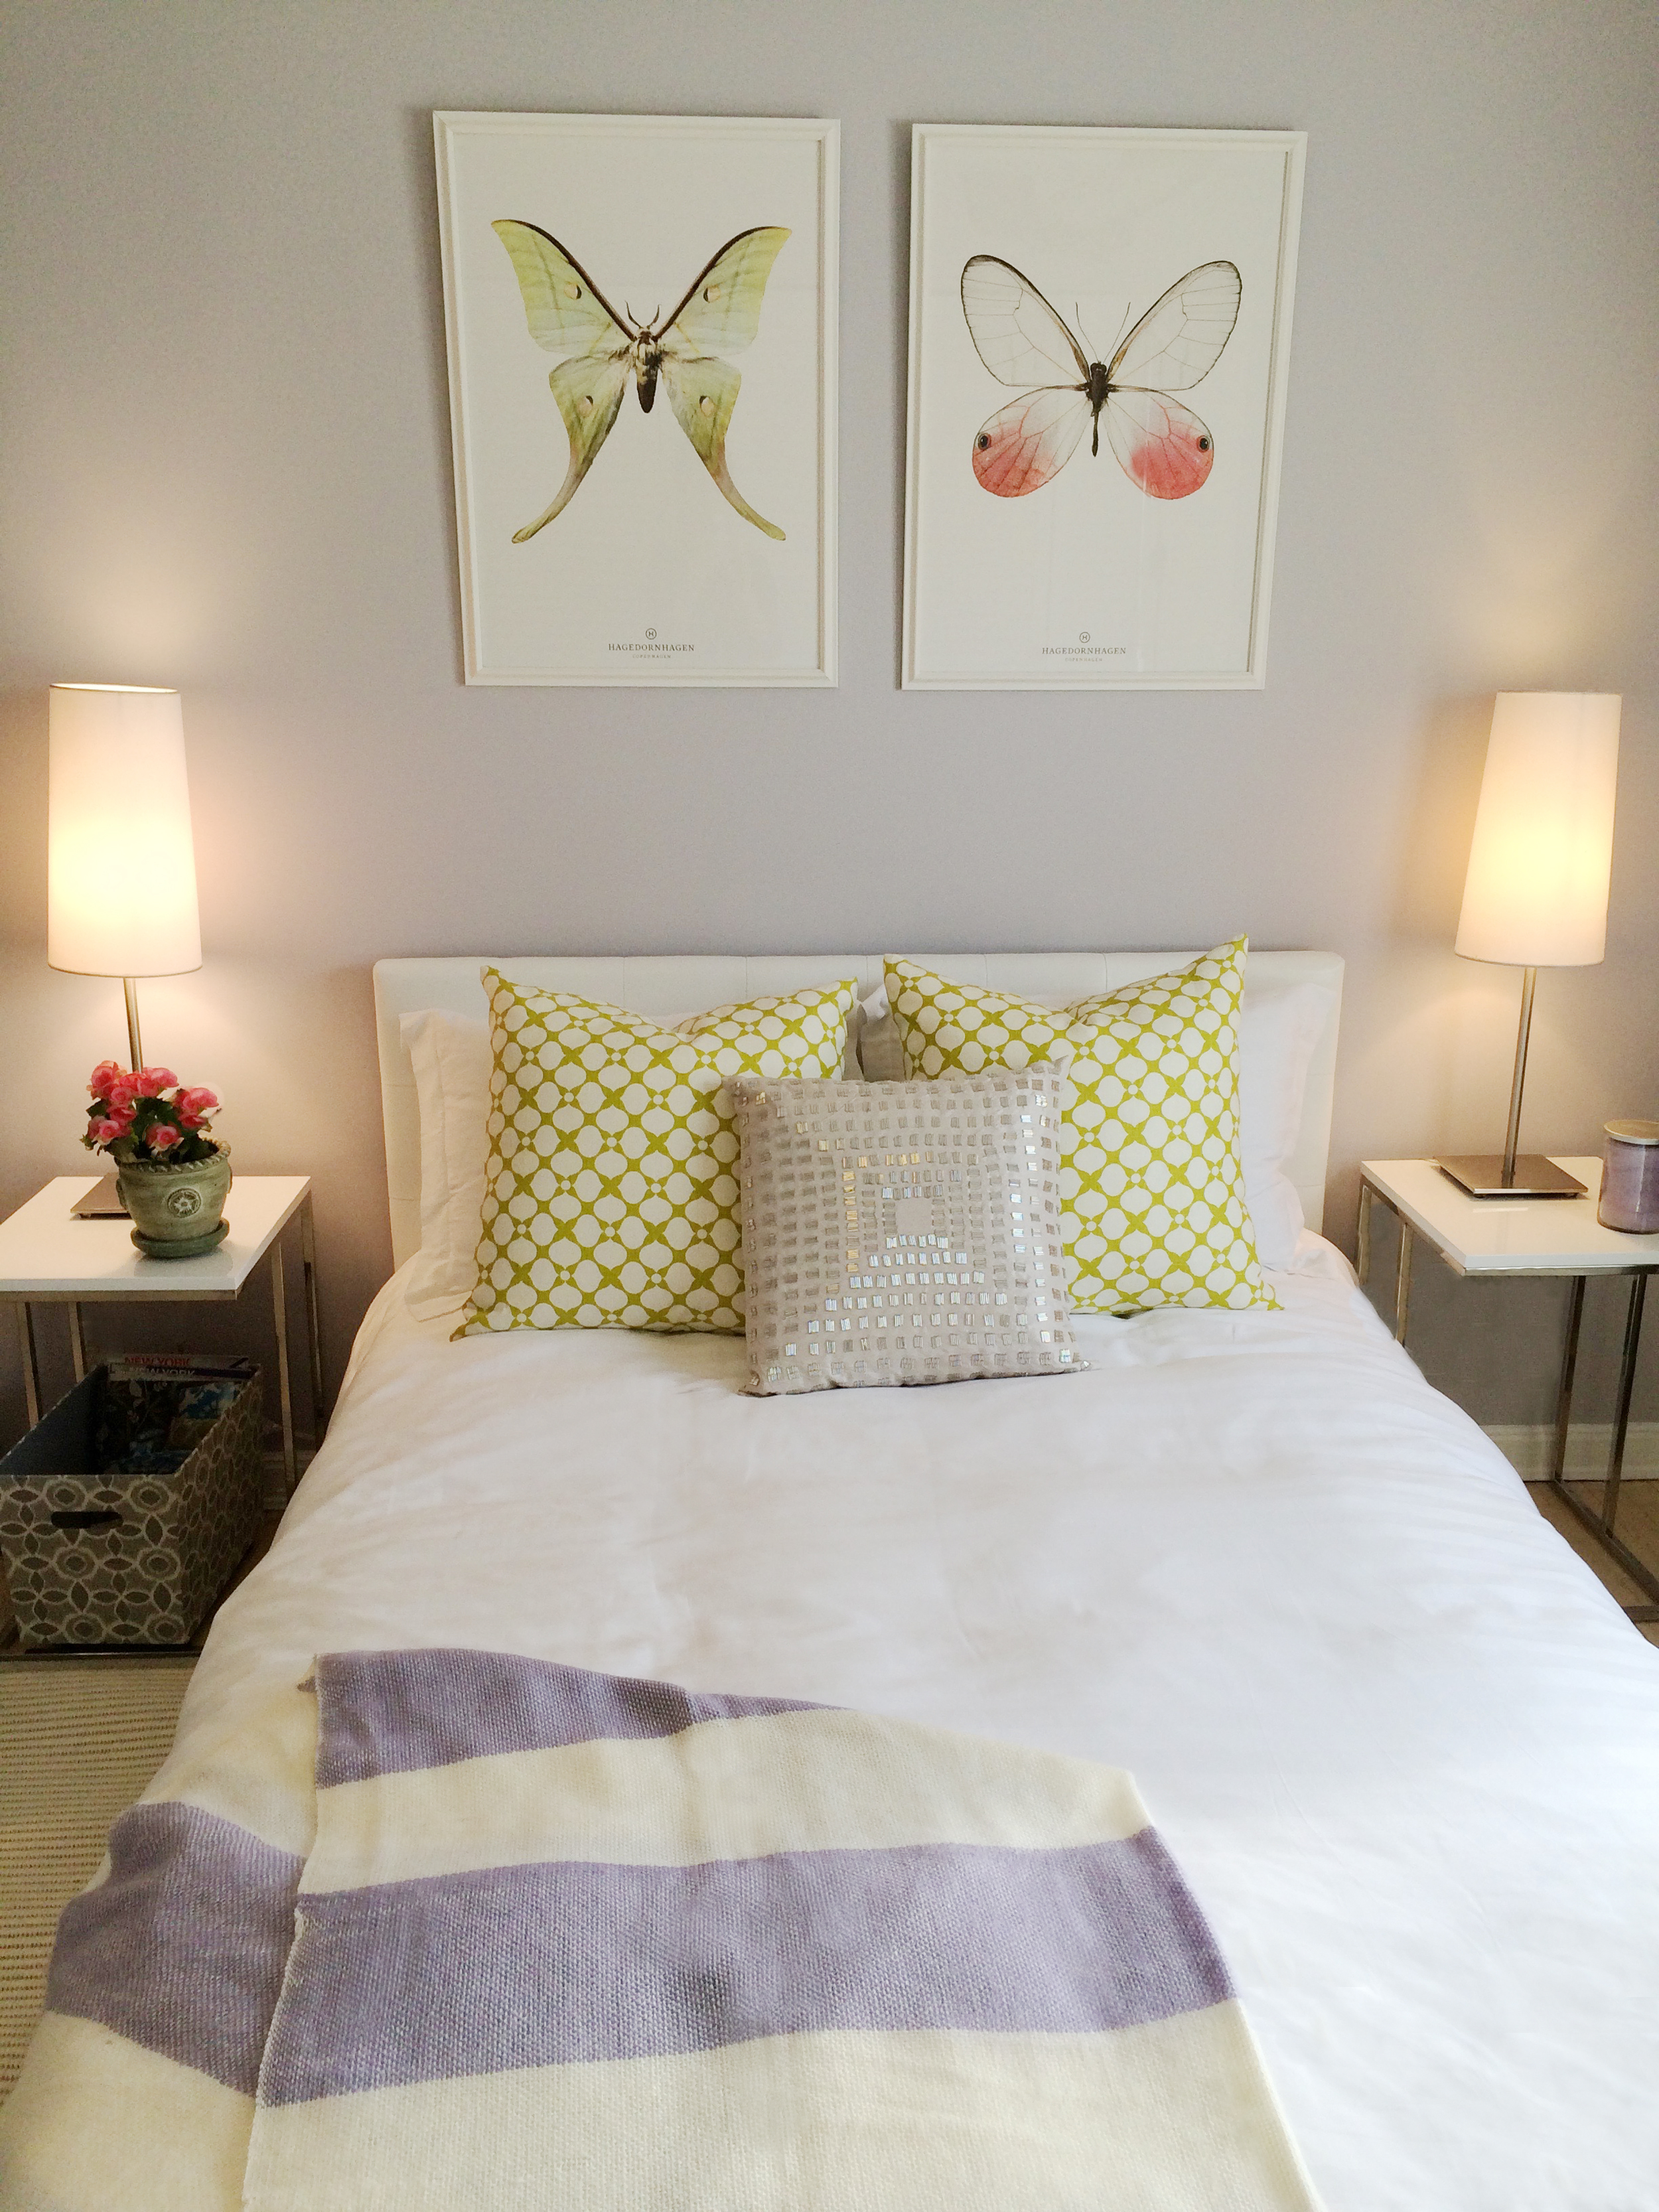 Kim Annick Mitchell_Production Designer_HGTV_Buying and Selling with The Property Brothers_Season 3_Episode 316_Girl Bedroom_Kontrast Butterfly Art.jpg